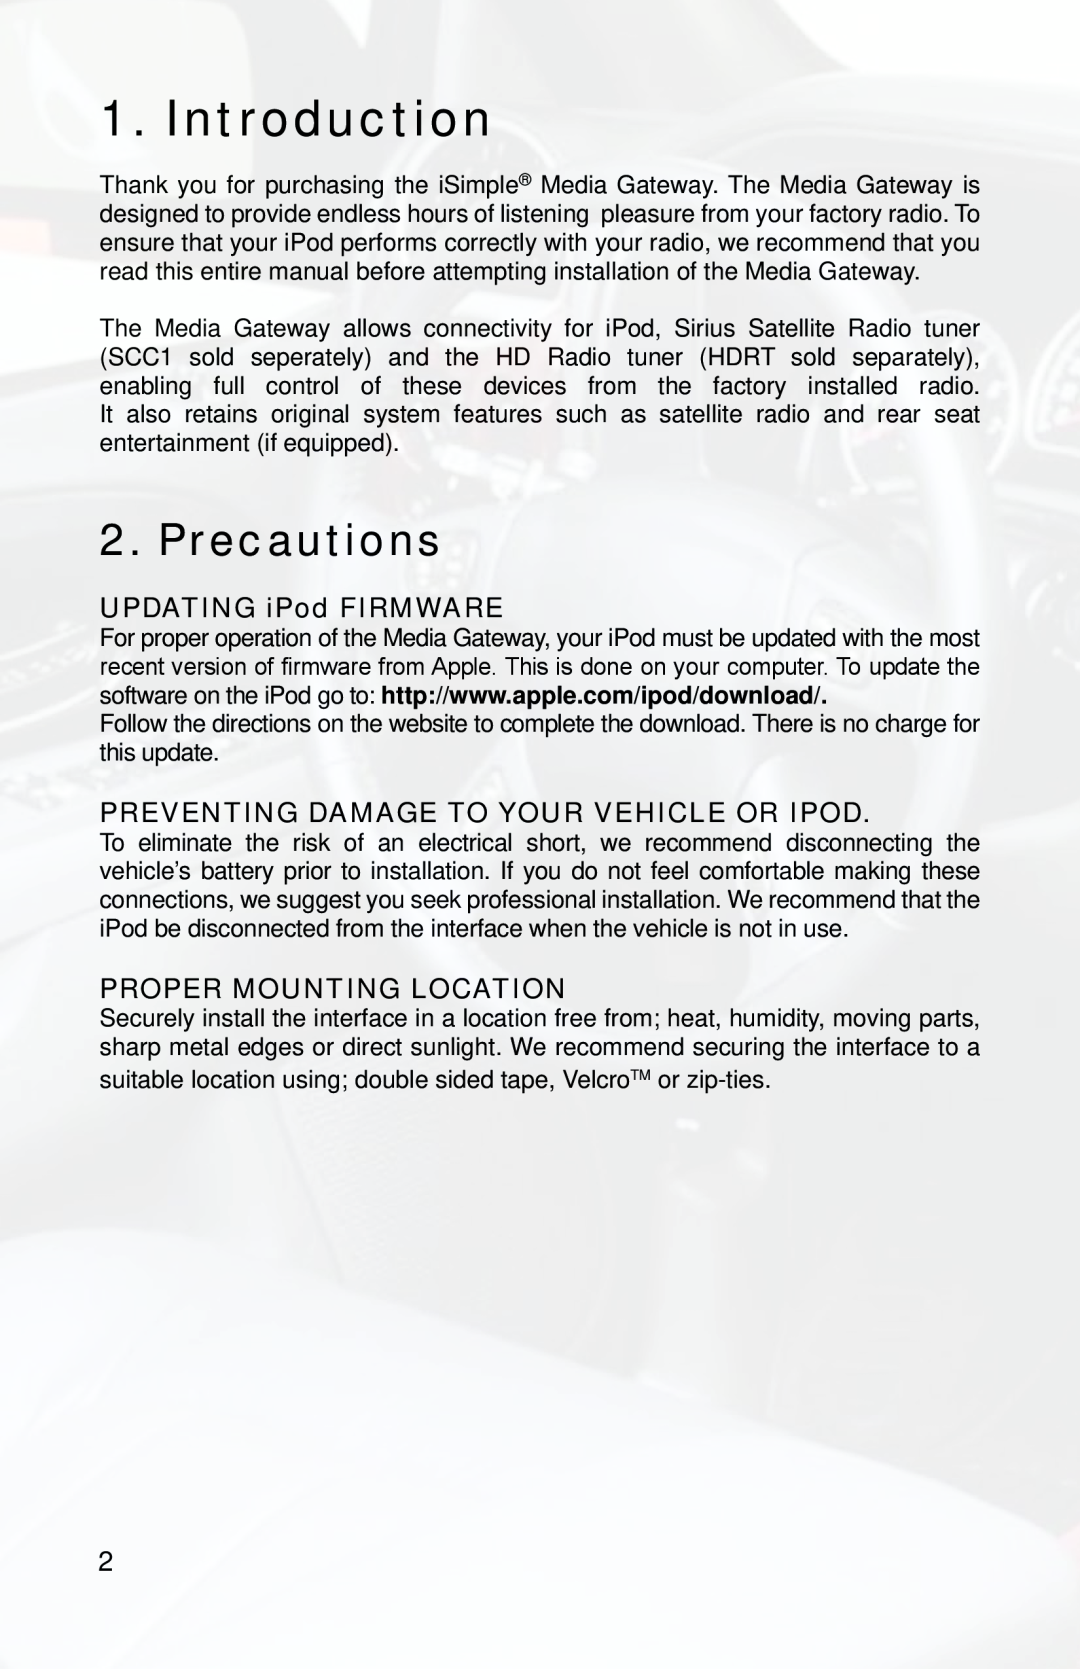 iSimple PGHGM5, PXAMG Introduction, Precautions, UPDATING iPod FIRMWARE, PREVENTING DAMAGE TO YOUR VEHICLE OR iPod 